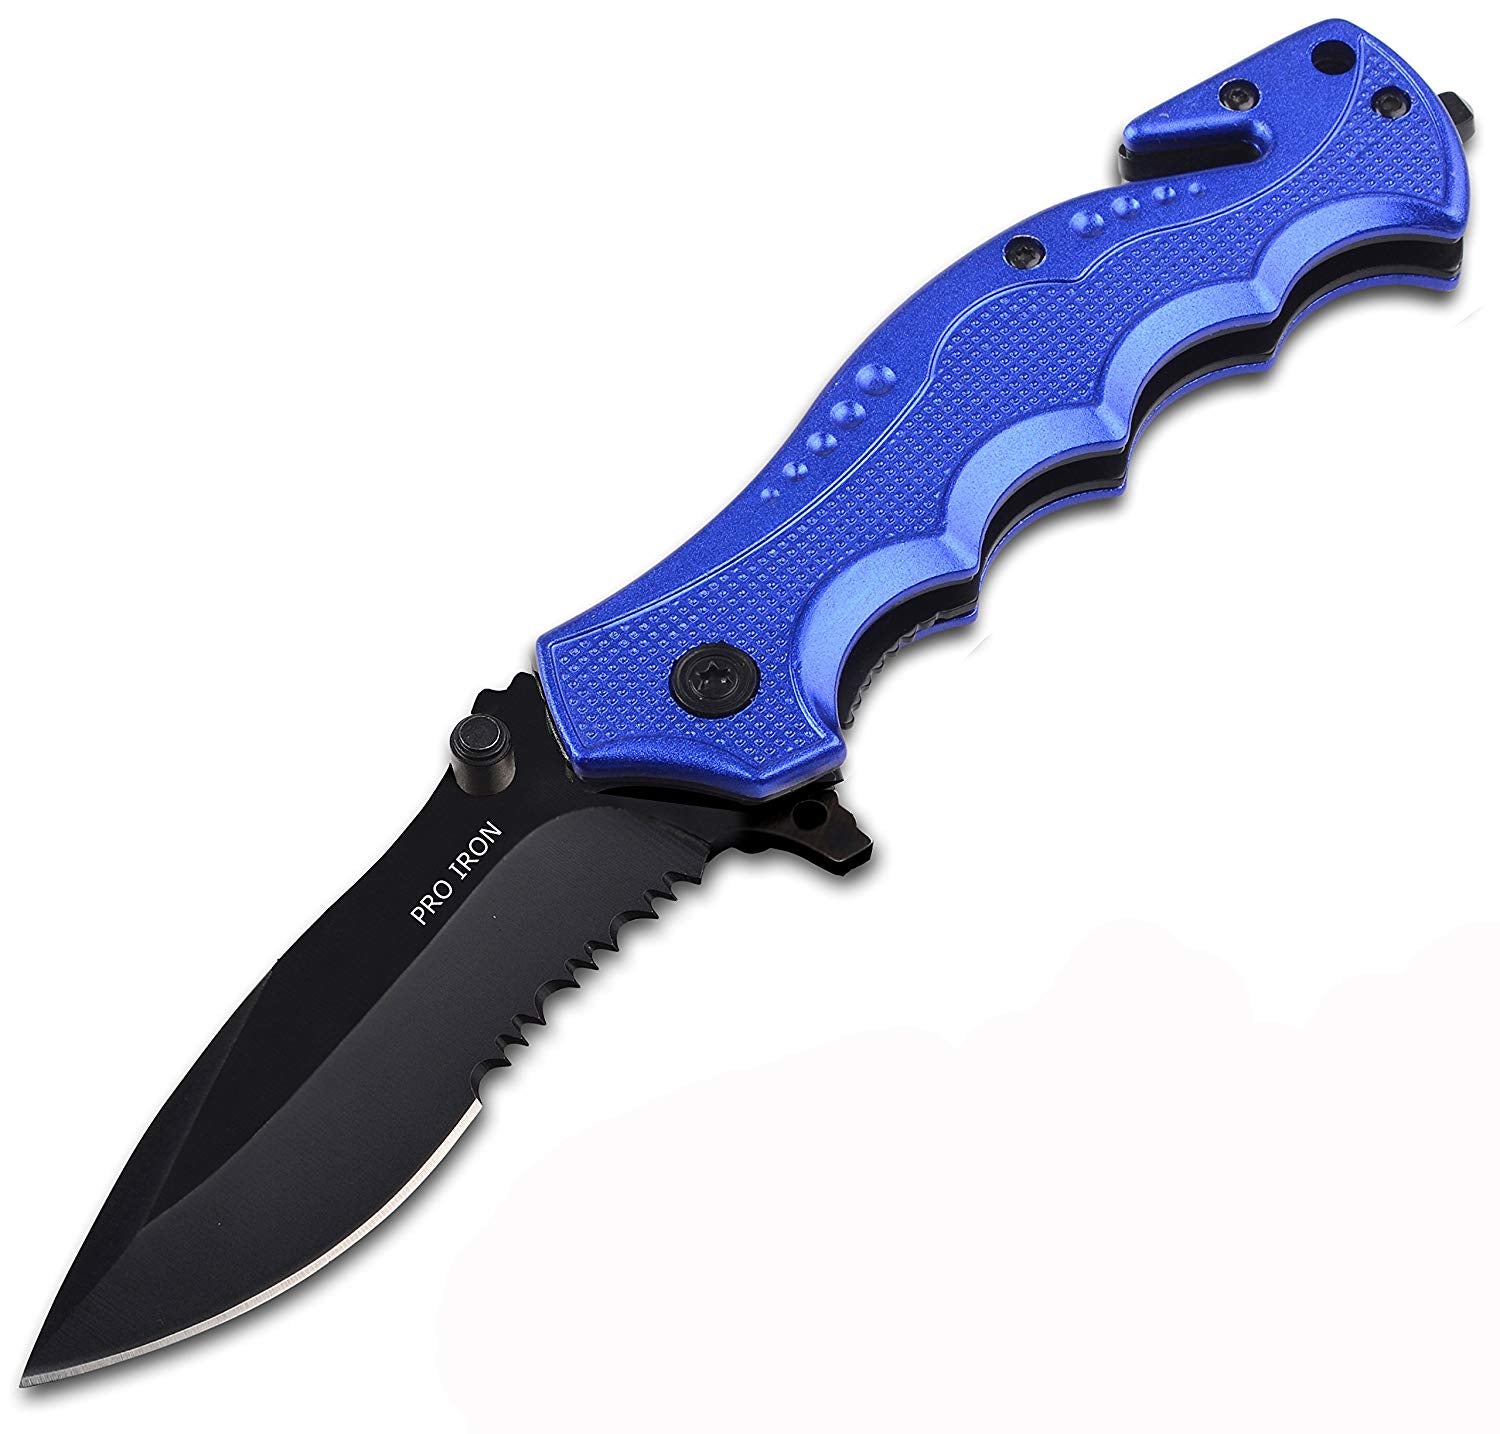 Serrated Edge Outdoor Survival Camping Hunting Knife - Blue